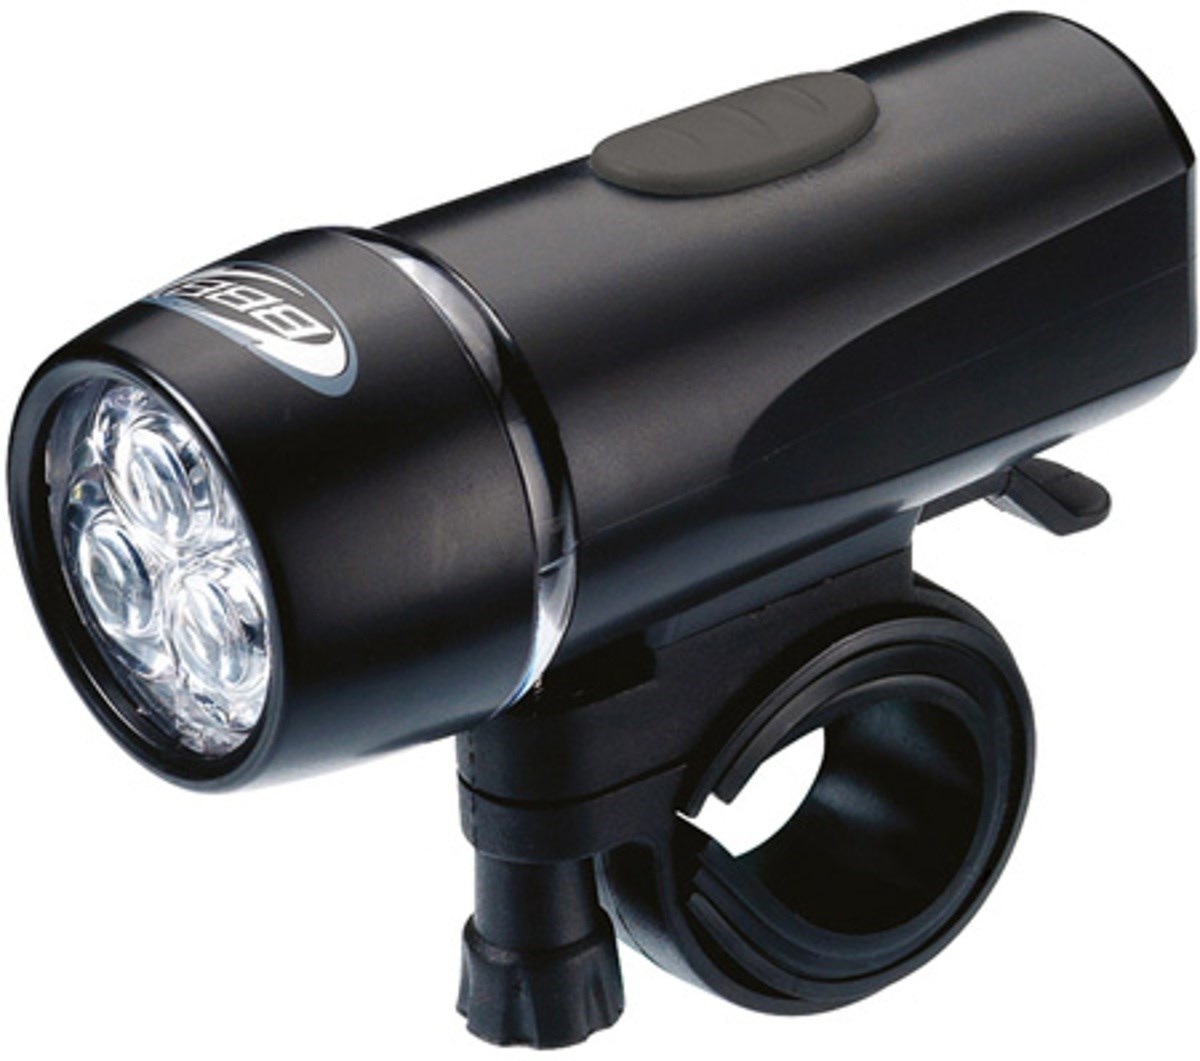 BBB BLS-26 - UltraBeam Front Light 3 LED product image